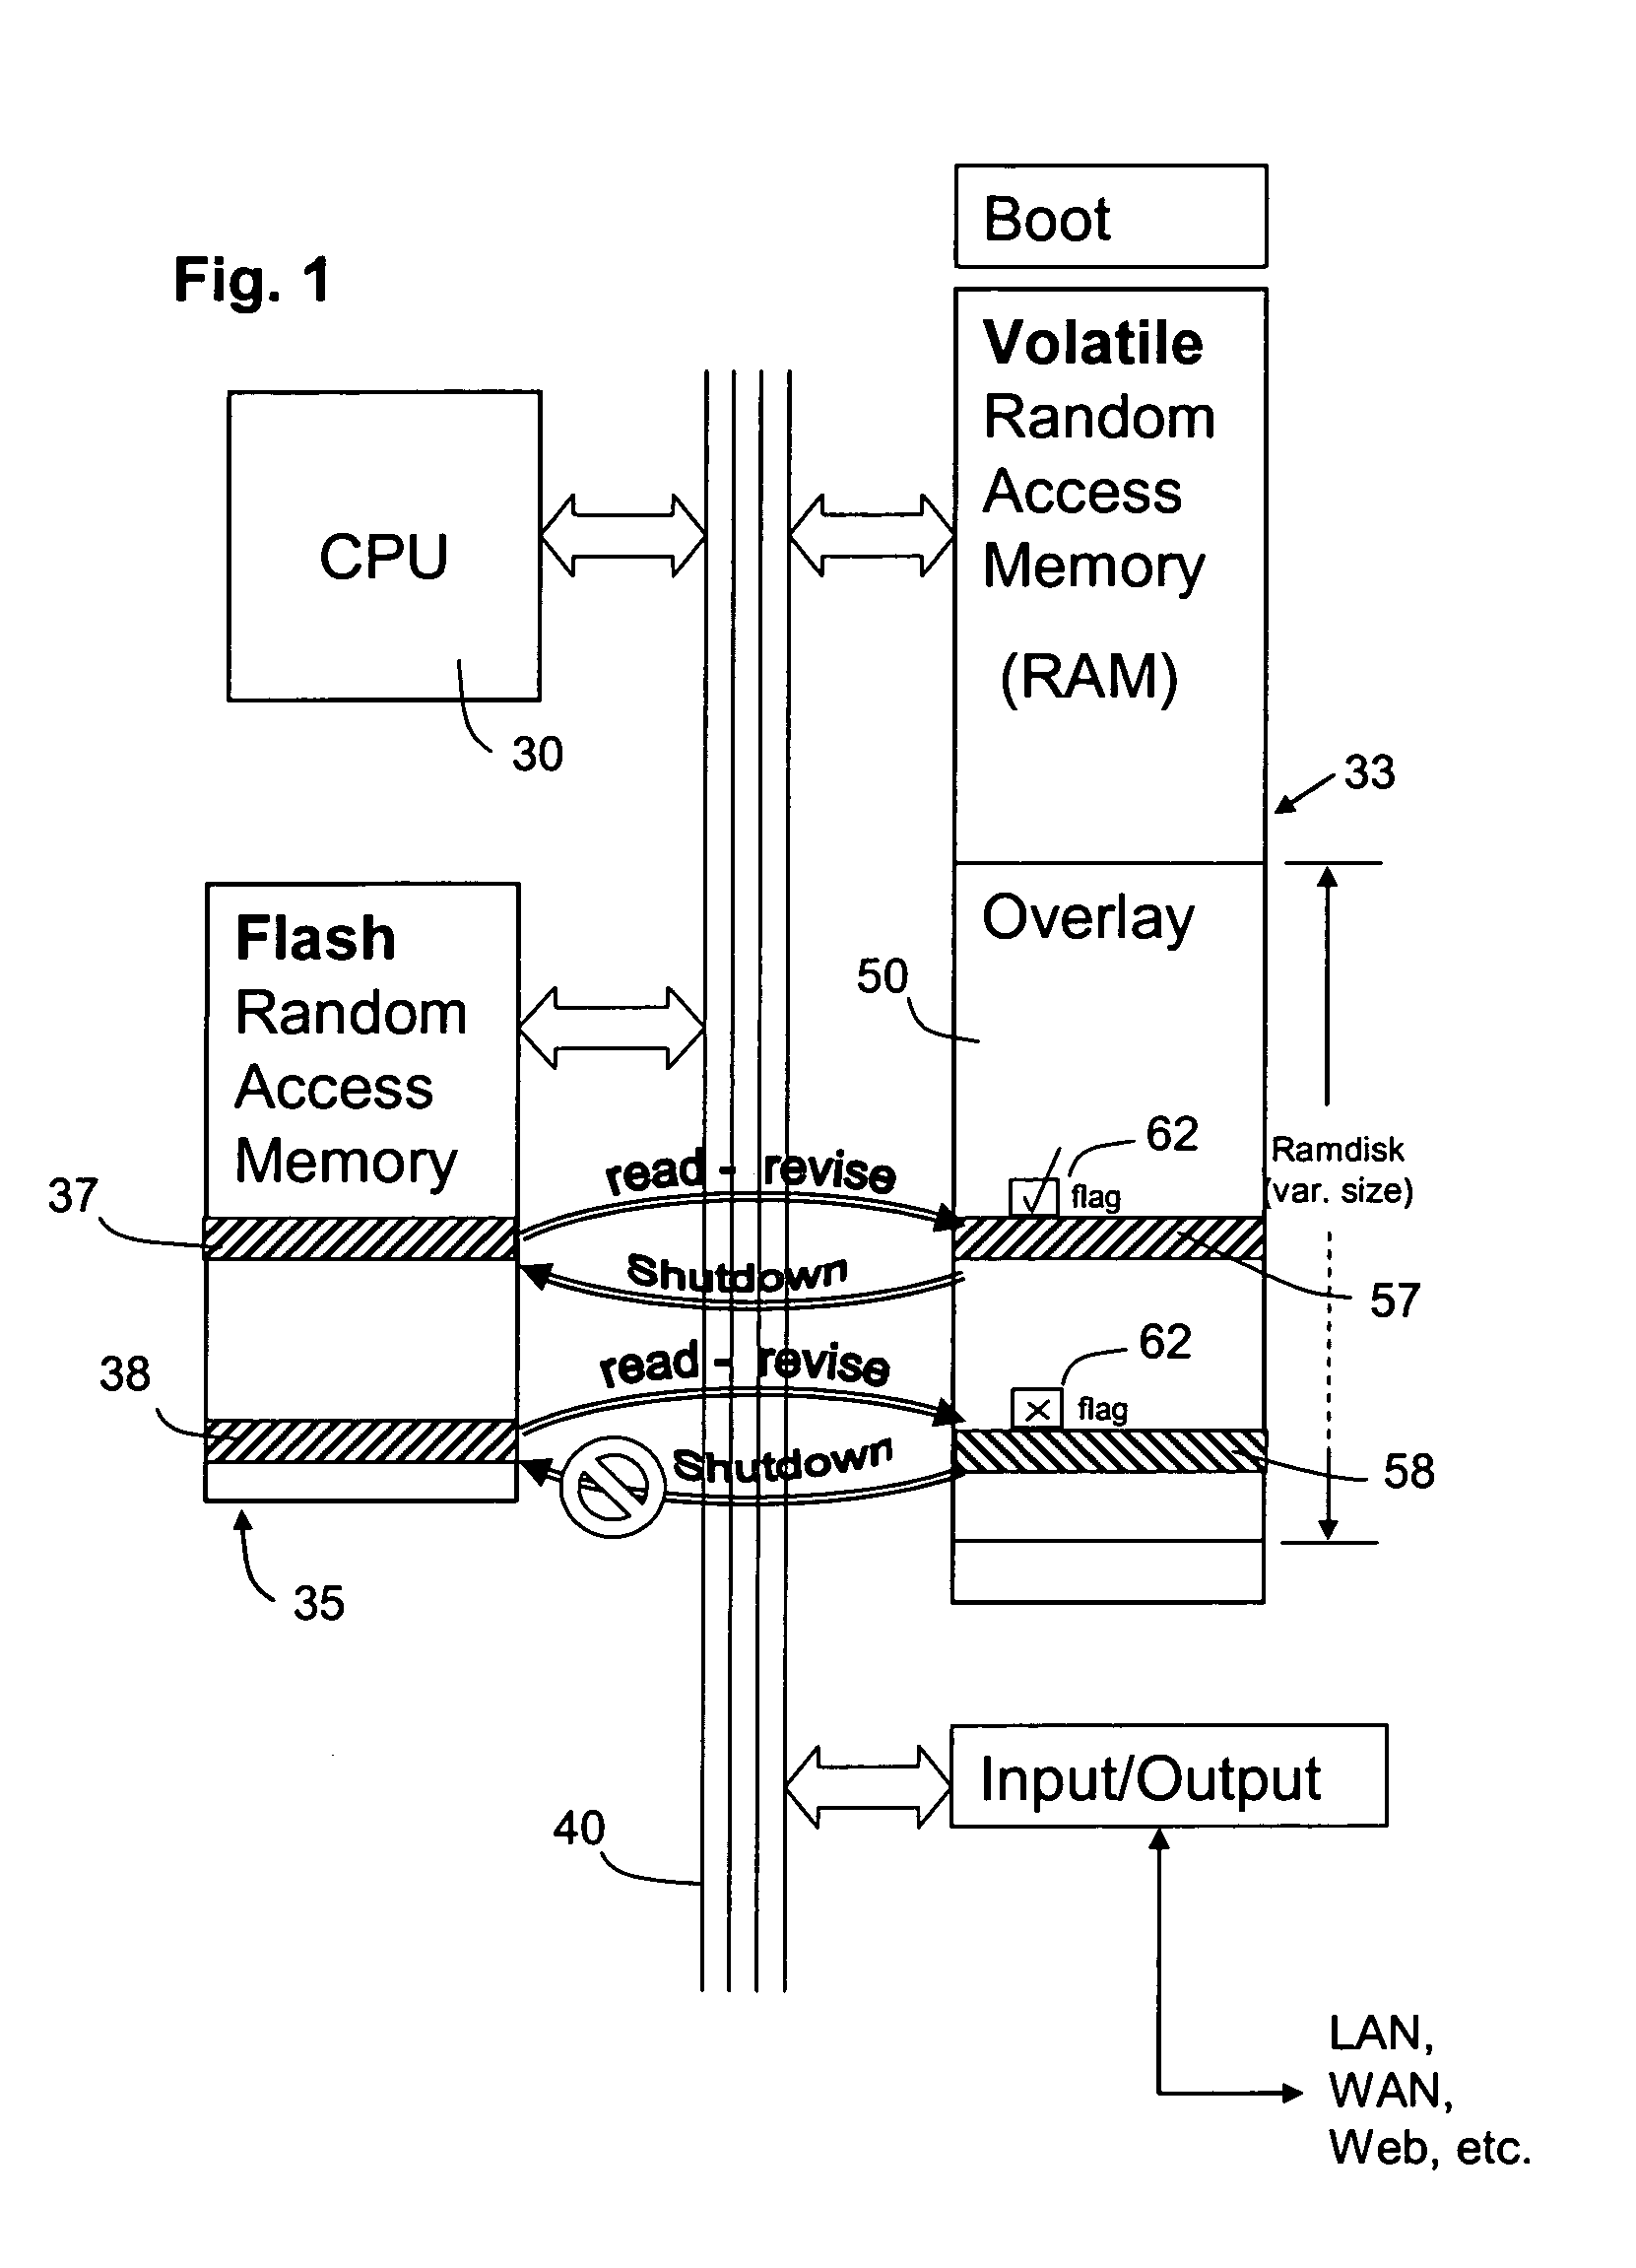 Computer operating system with selective restriction of memory write operations